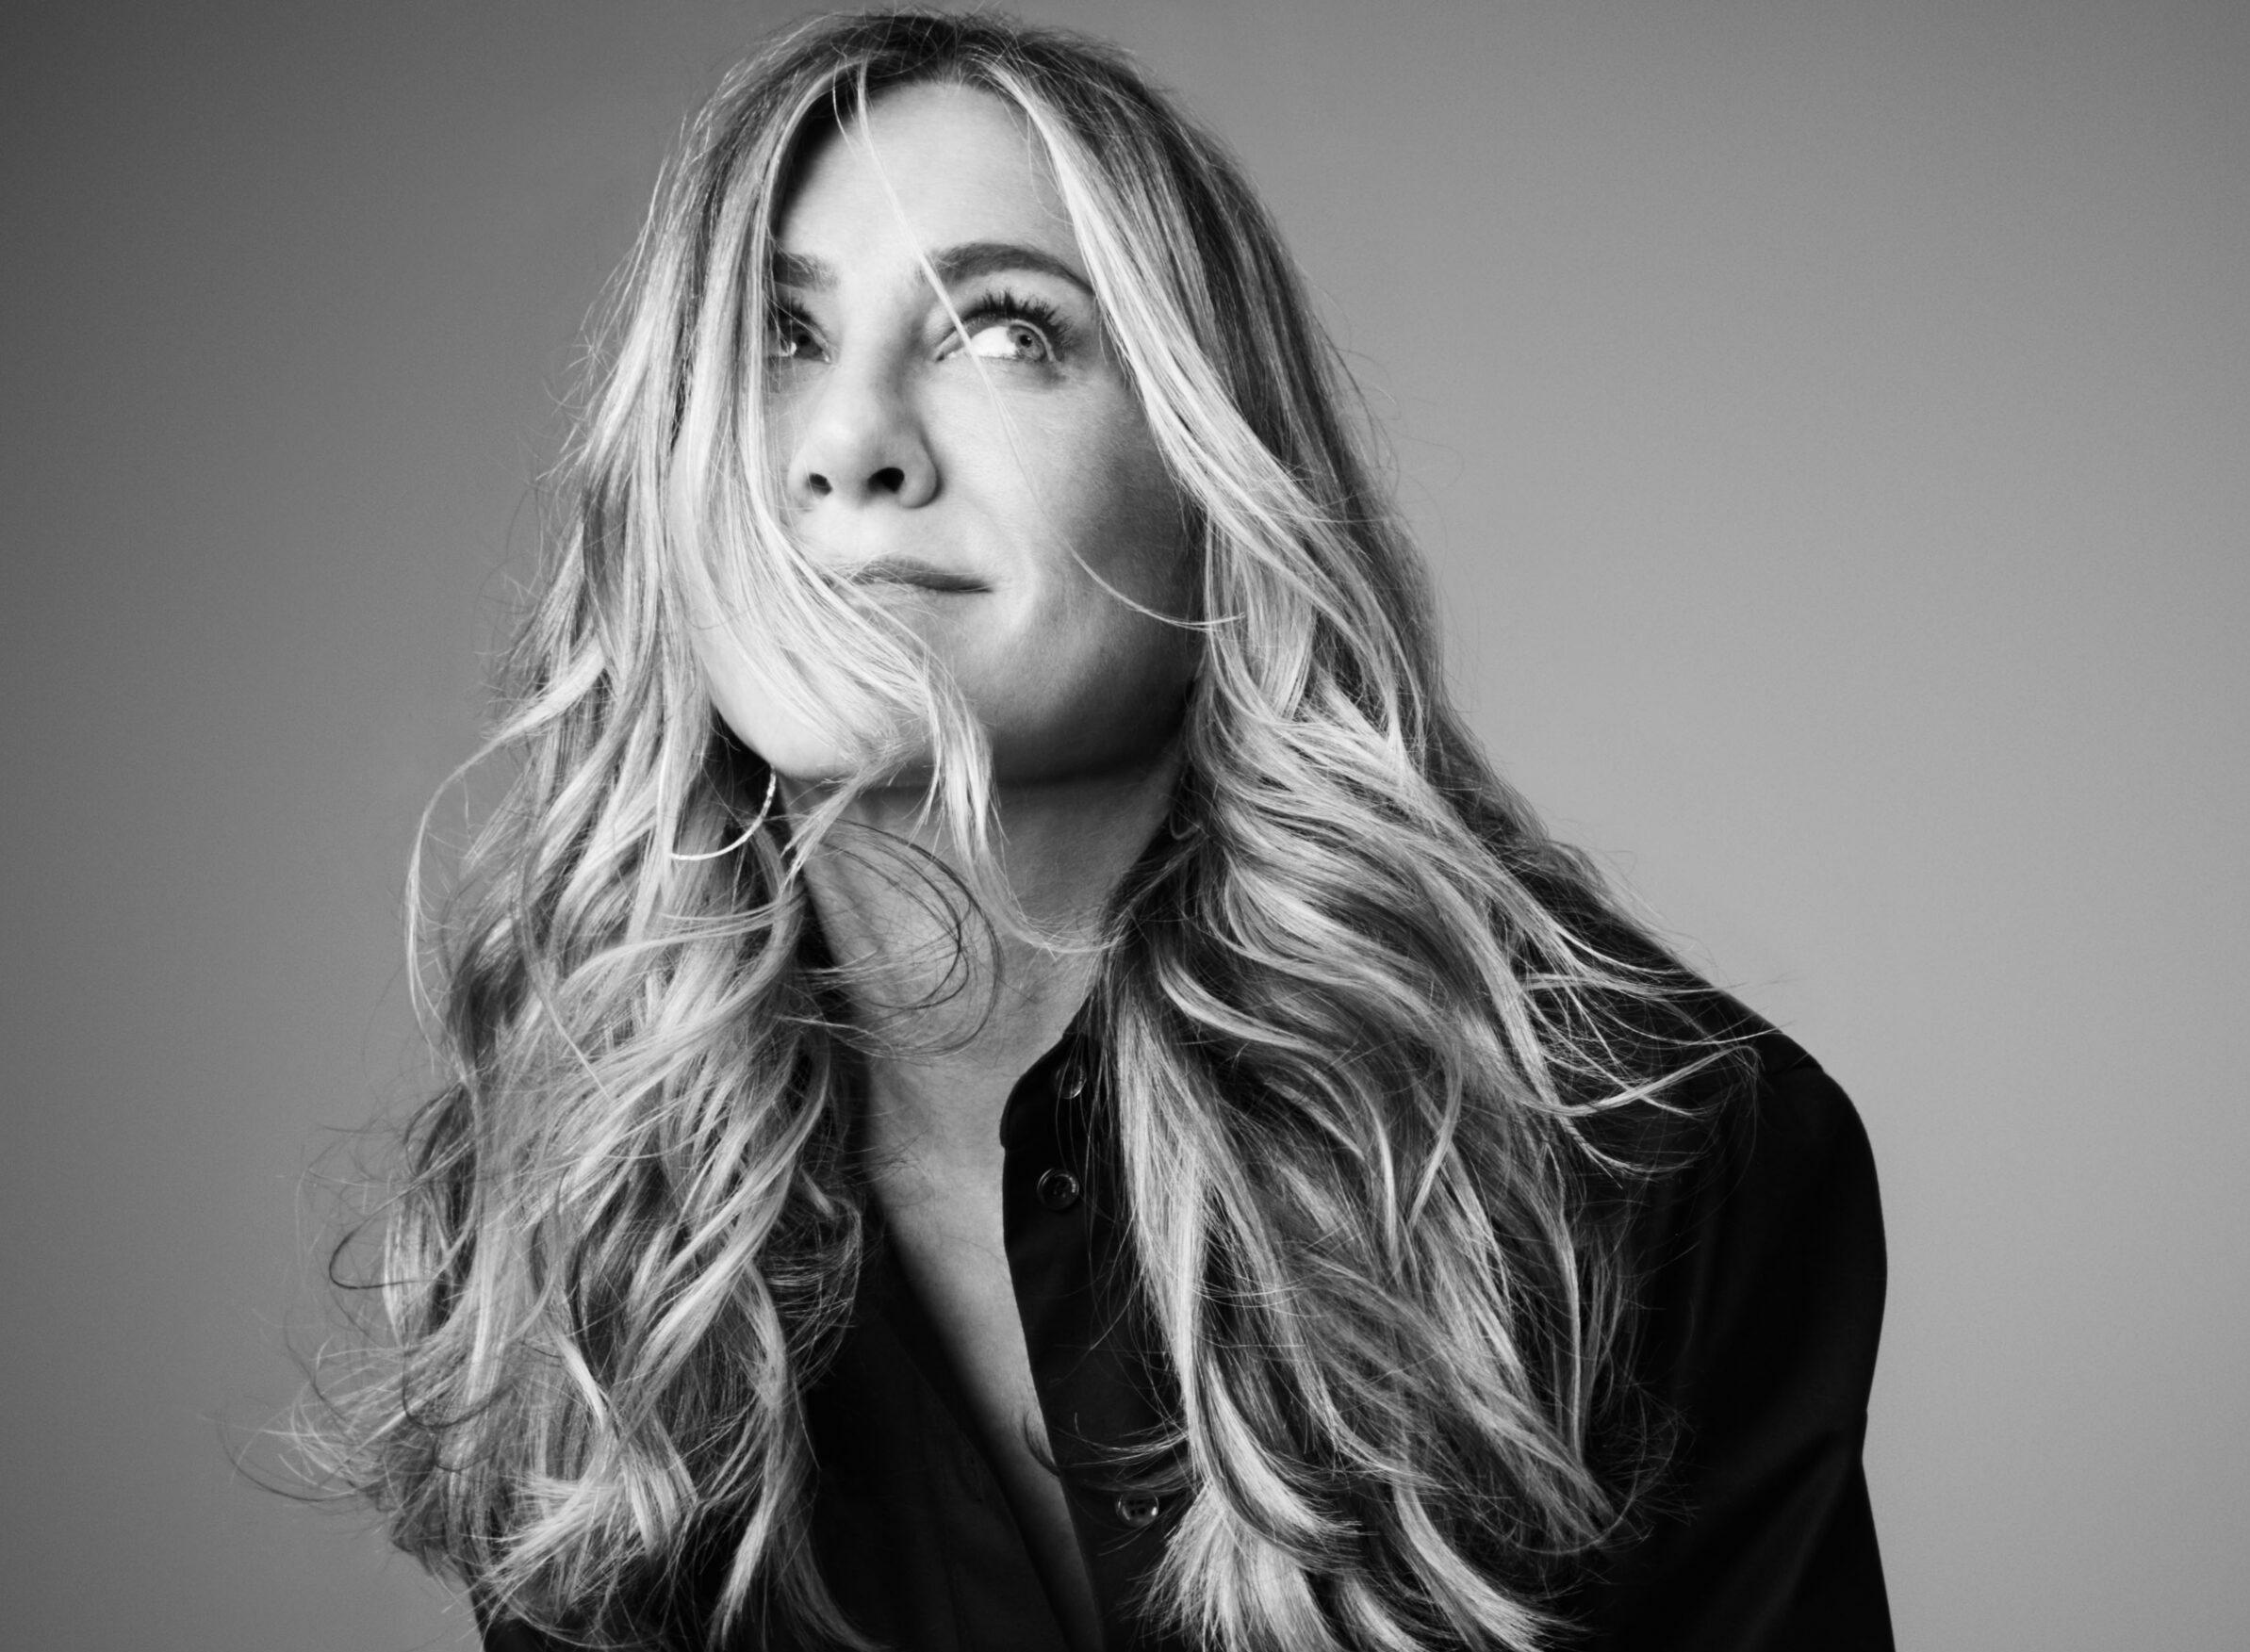 Jennifer Aniston launches her own haircare brand LolaVie